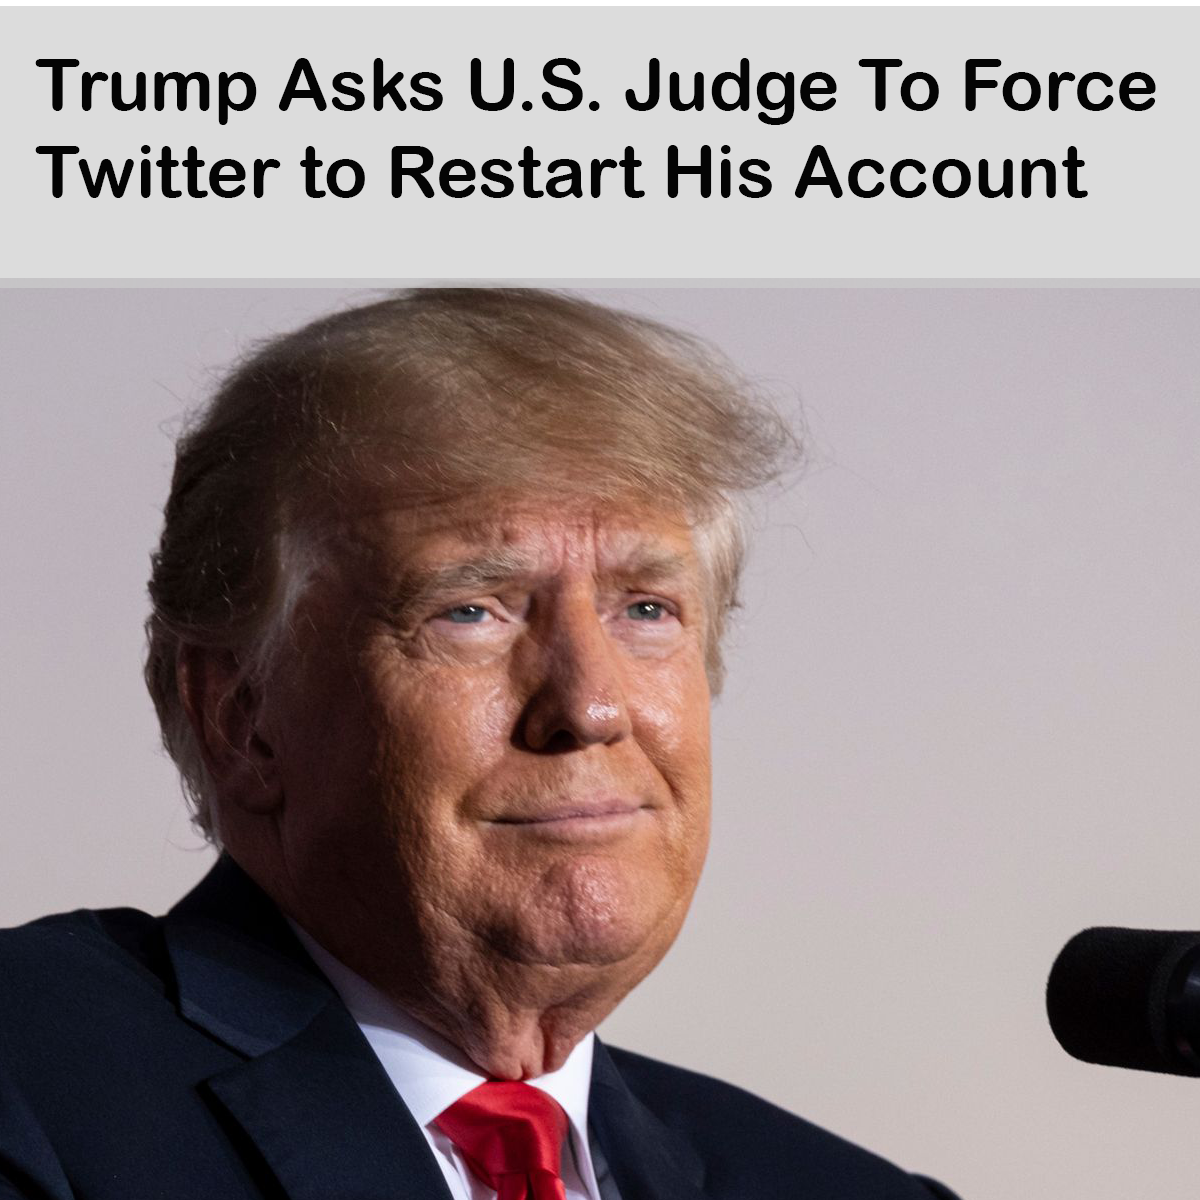 Trump Asks U.S. Judge To Force Twitter to Restart His Account